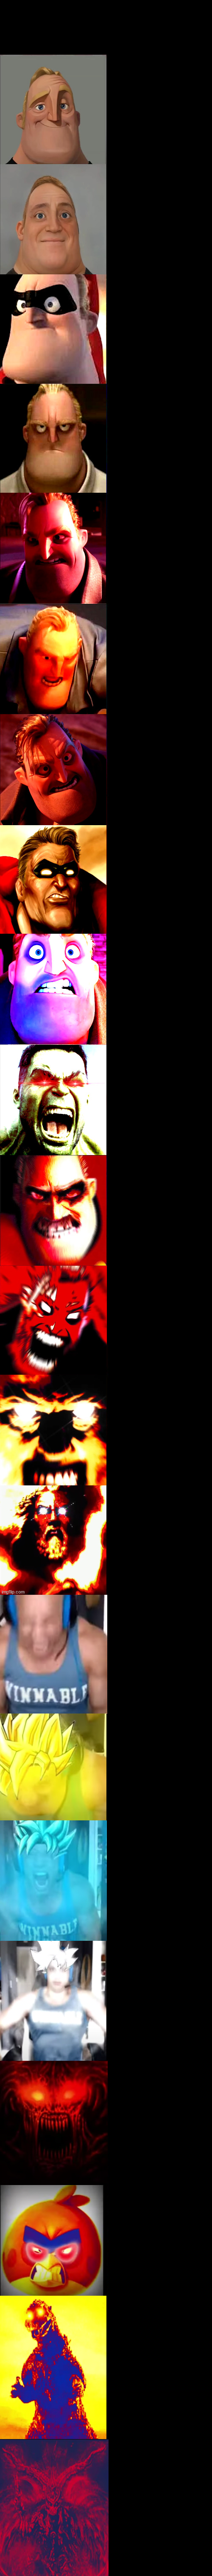 Mr Incredible Becoming Angry (21 phases) Blank Meme Template